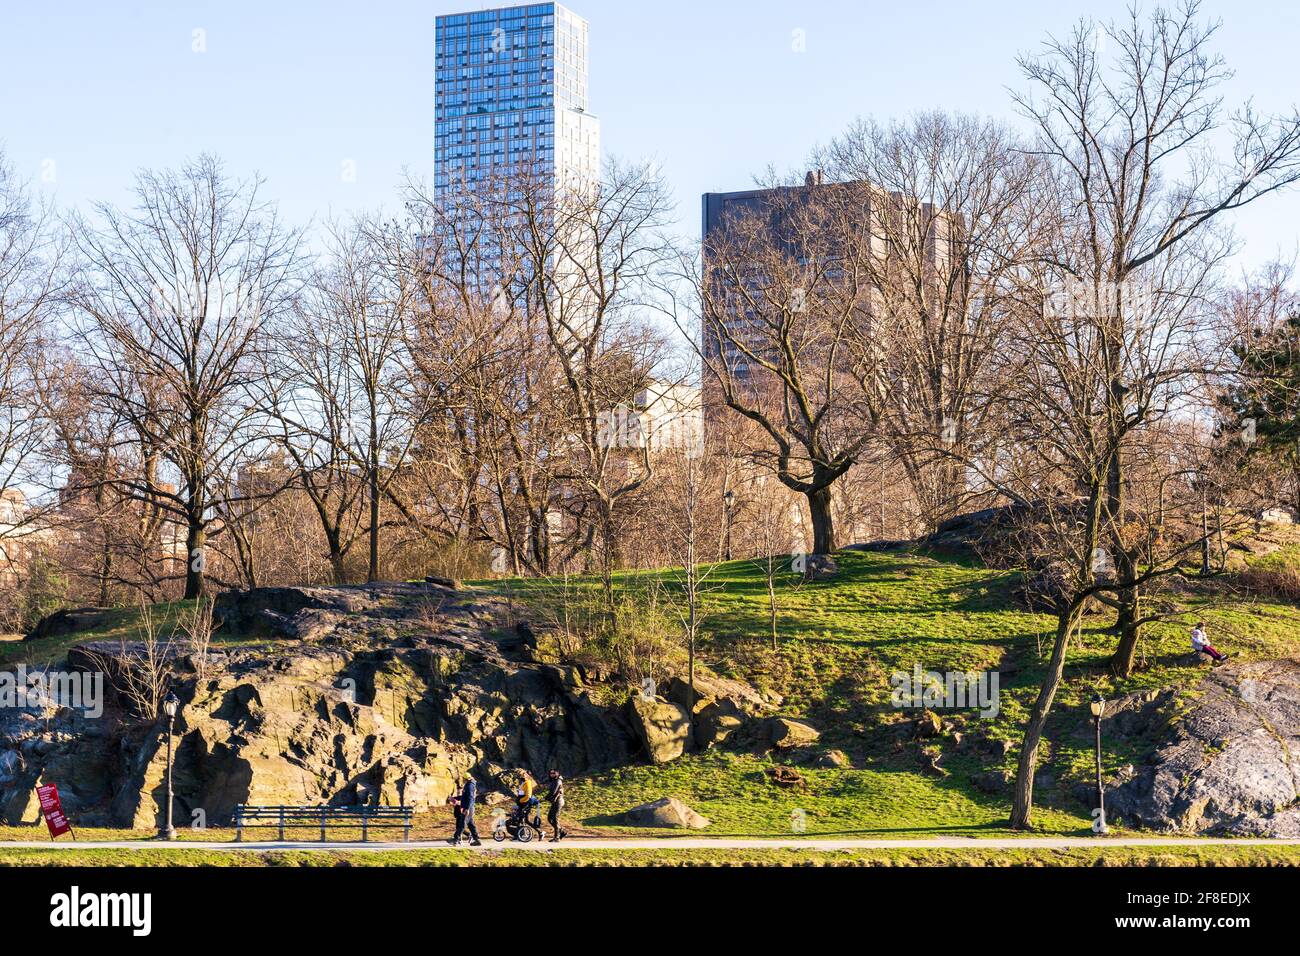 A Beautiful Sunny Day in Central Park New York City. Stock Photo